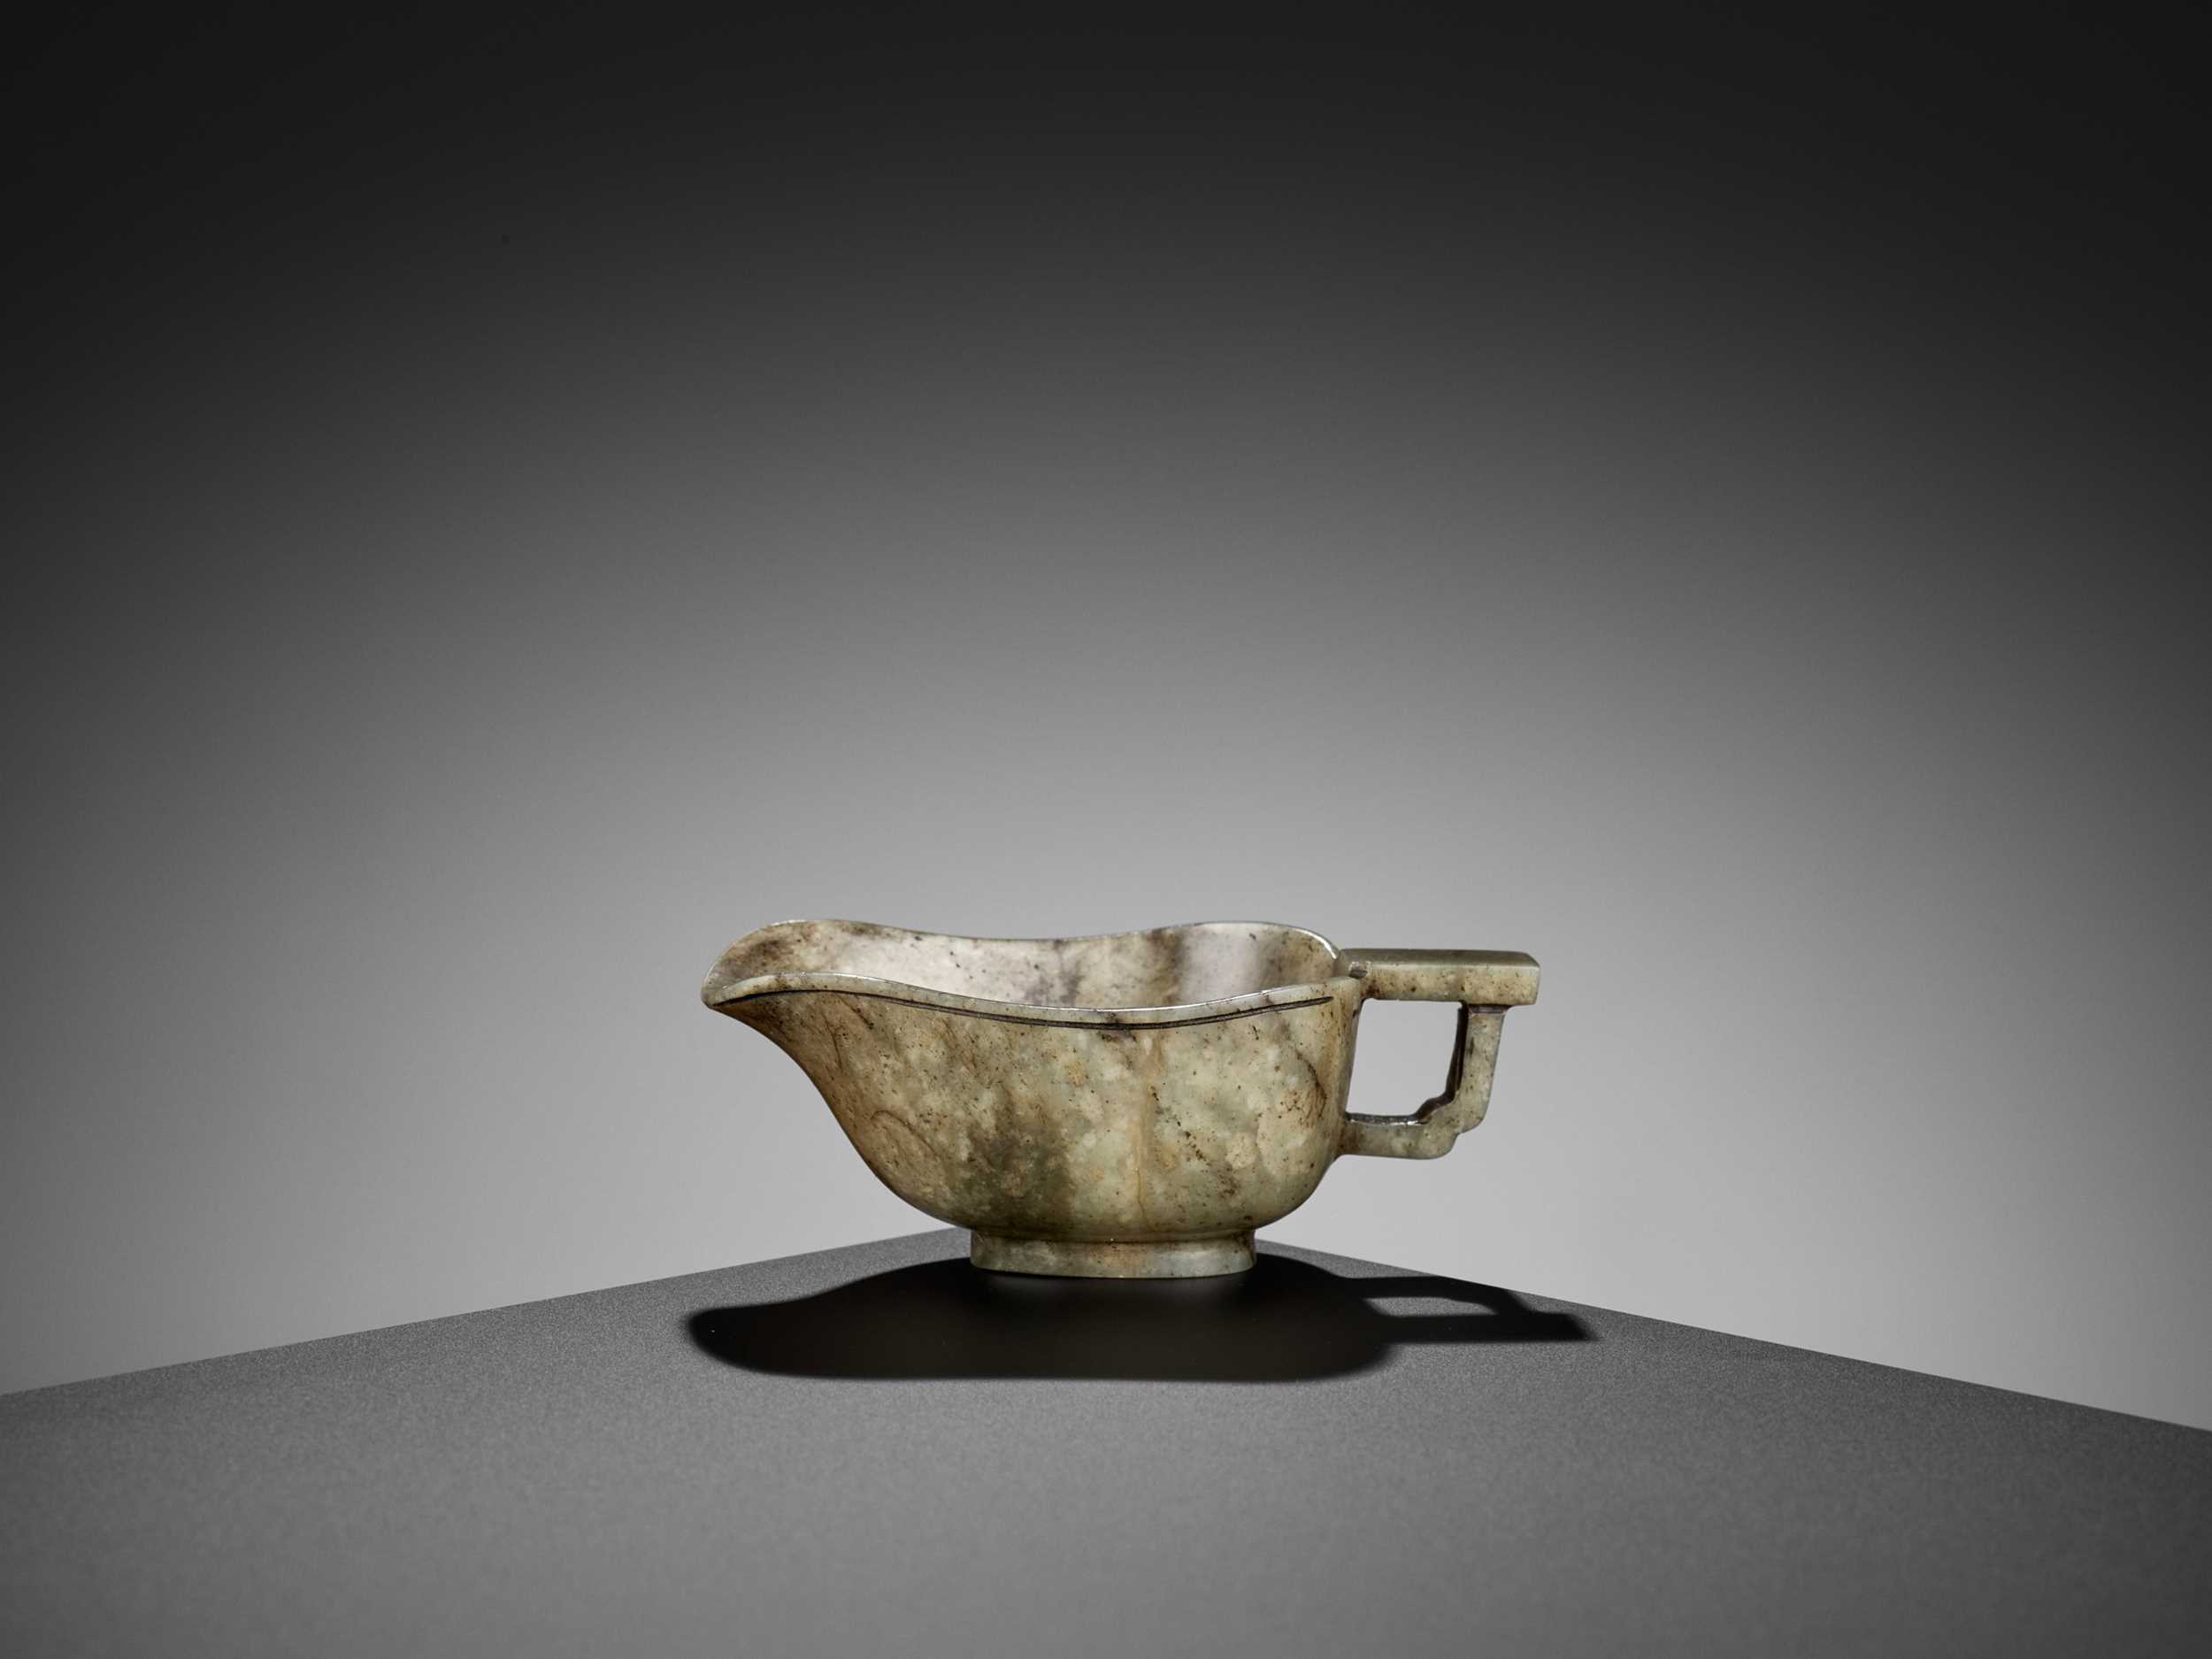 Lot 114 - A GRAY JADE ‘ARCHAISTIC’ POURING VESSEL, YI, EARLY QING DYNASTY